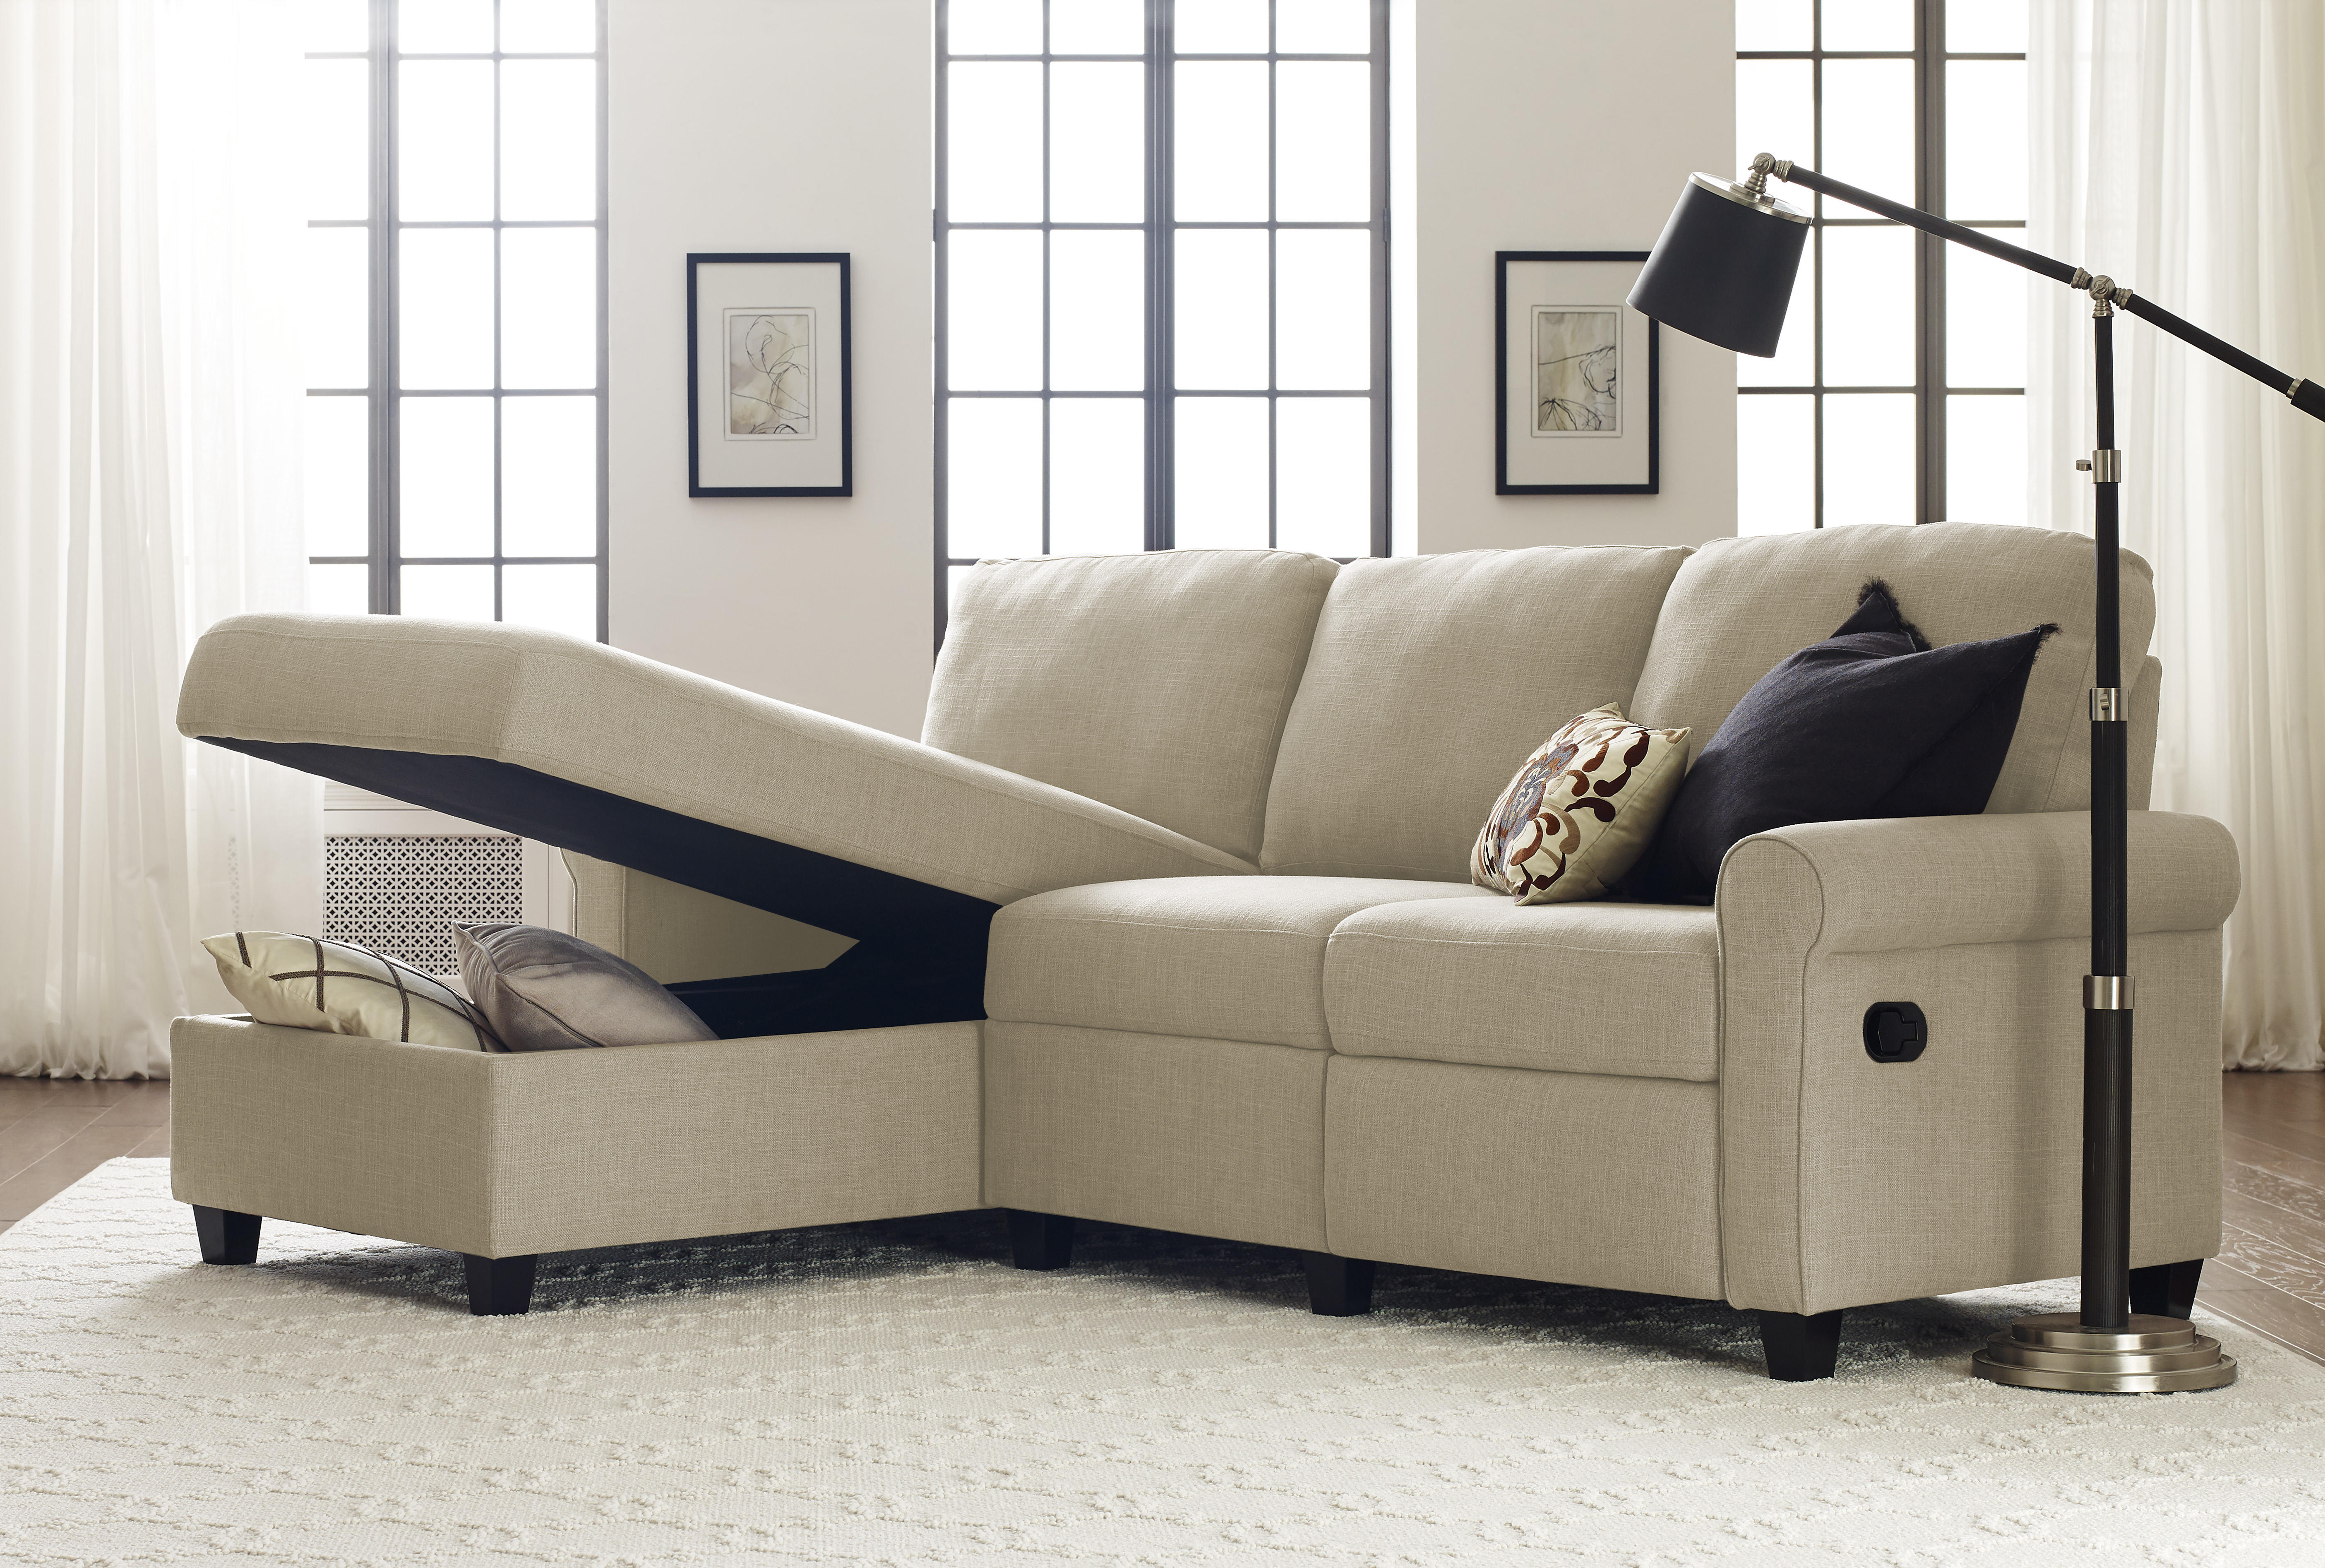 Serta Copenhagen Reclining Sectional with Left Storage Chaise - Oatmeal - image 2 of 9